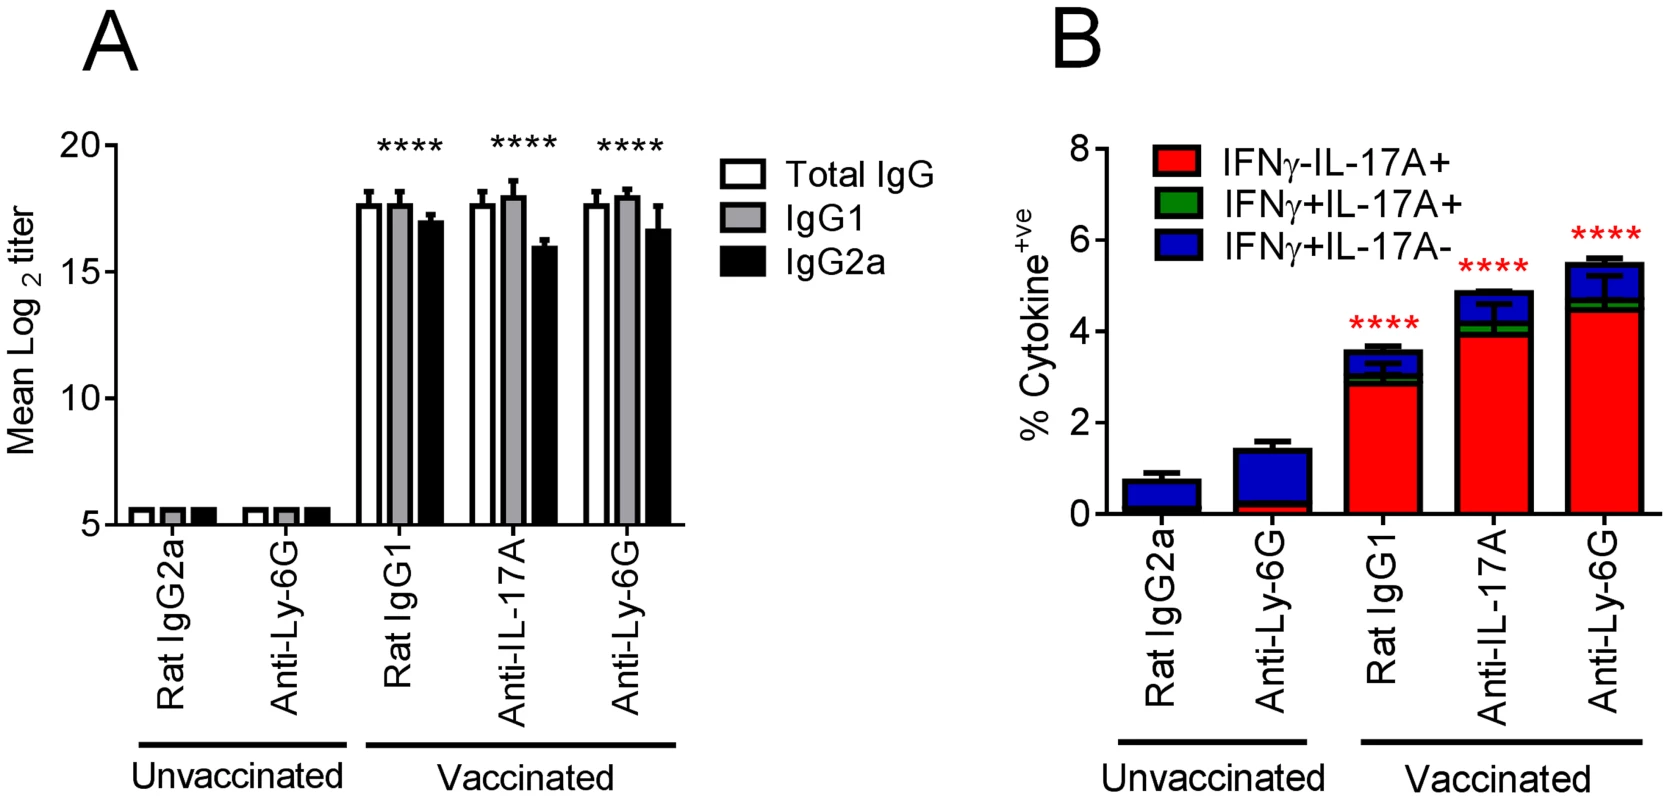 Adaptive immunity is unaffected by IL-17A blockade or neutrophil depletion following viral challenge.